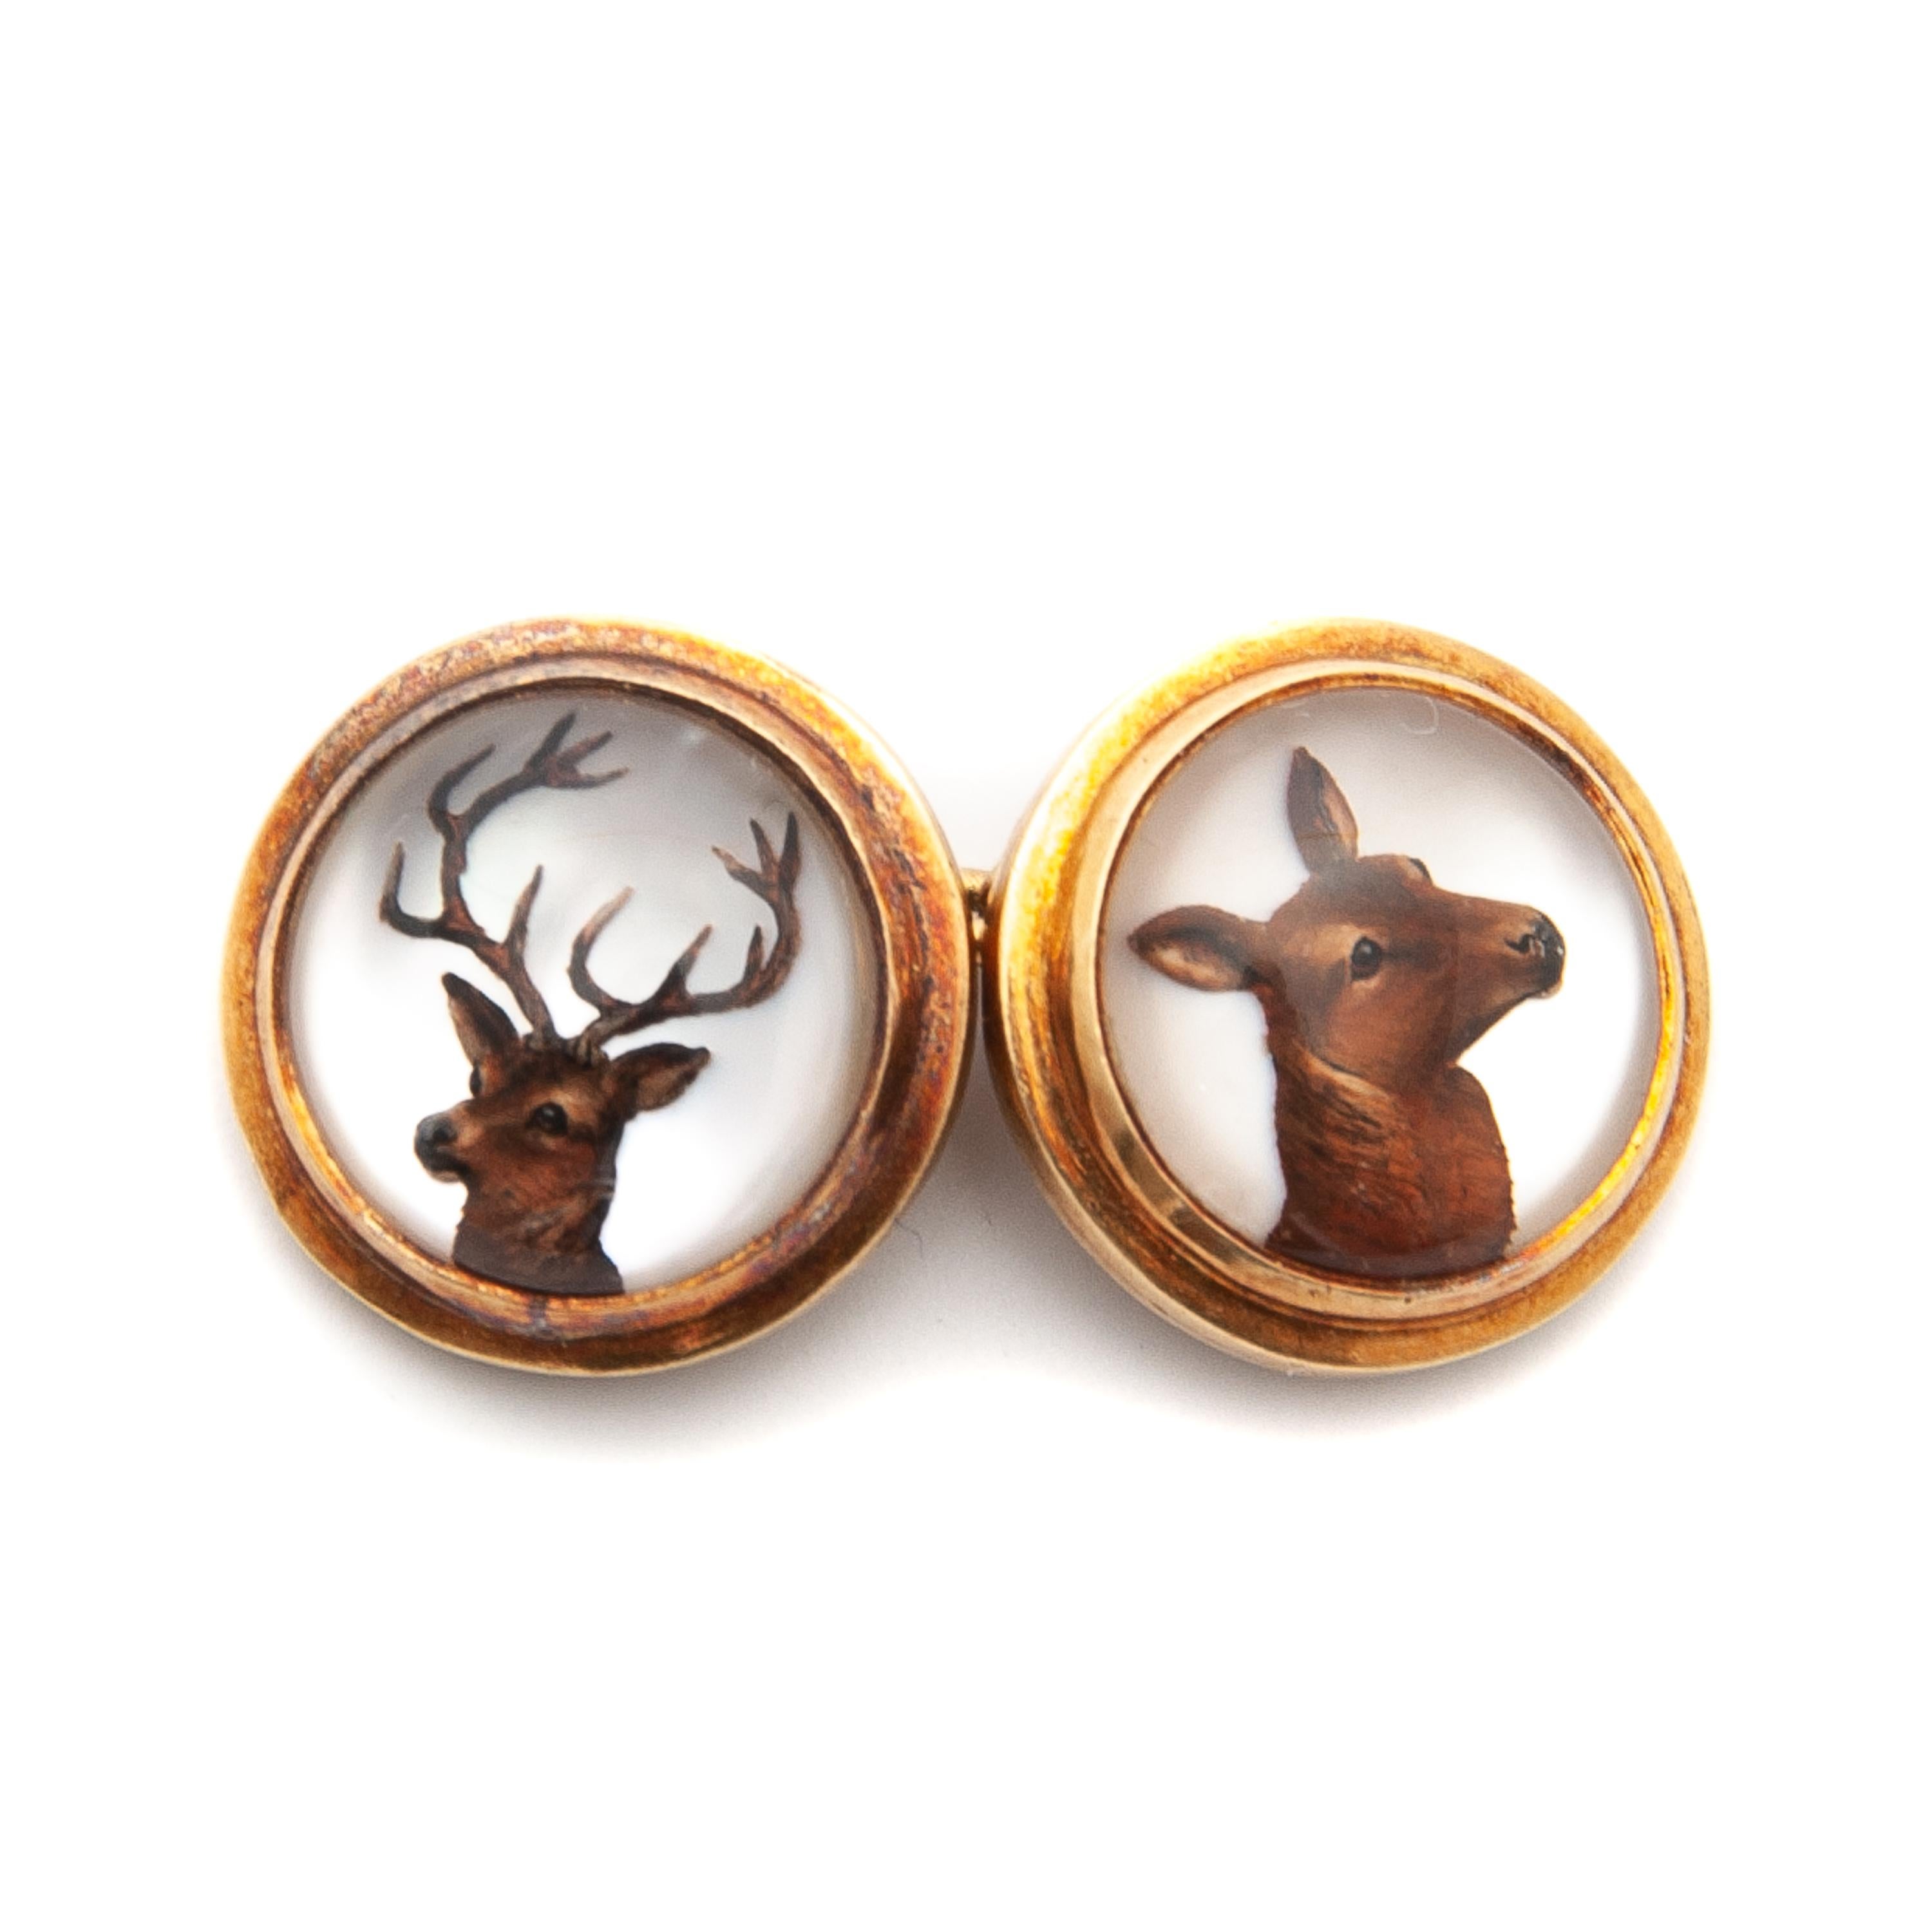 Reverse intaglio crystal cufflinks with forest animal scenes. The cufflinks each have a different wild animal carved in cabochon crystals. Each painting was done on the reverse carved crystal and has a mother of pearl background and all four images